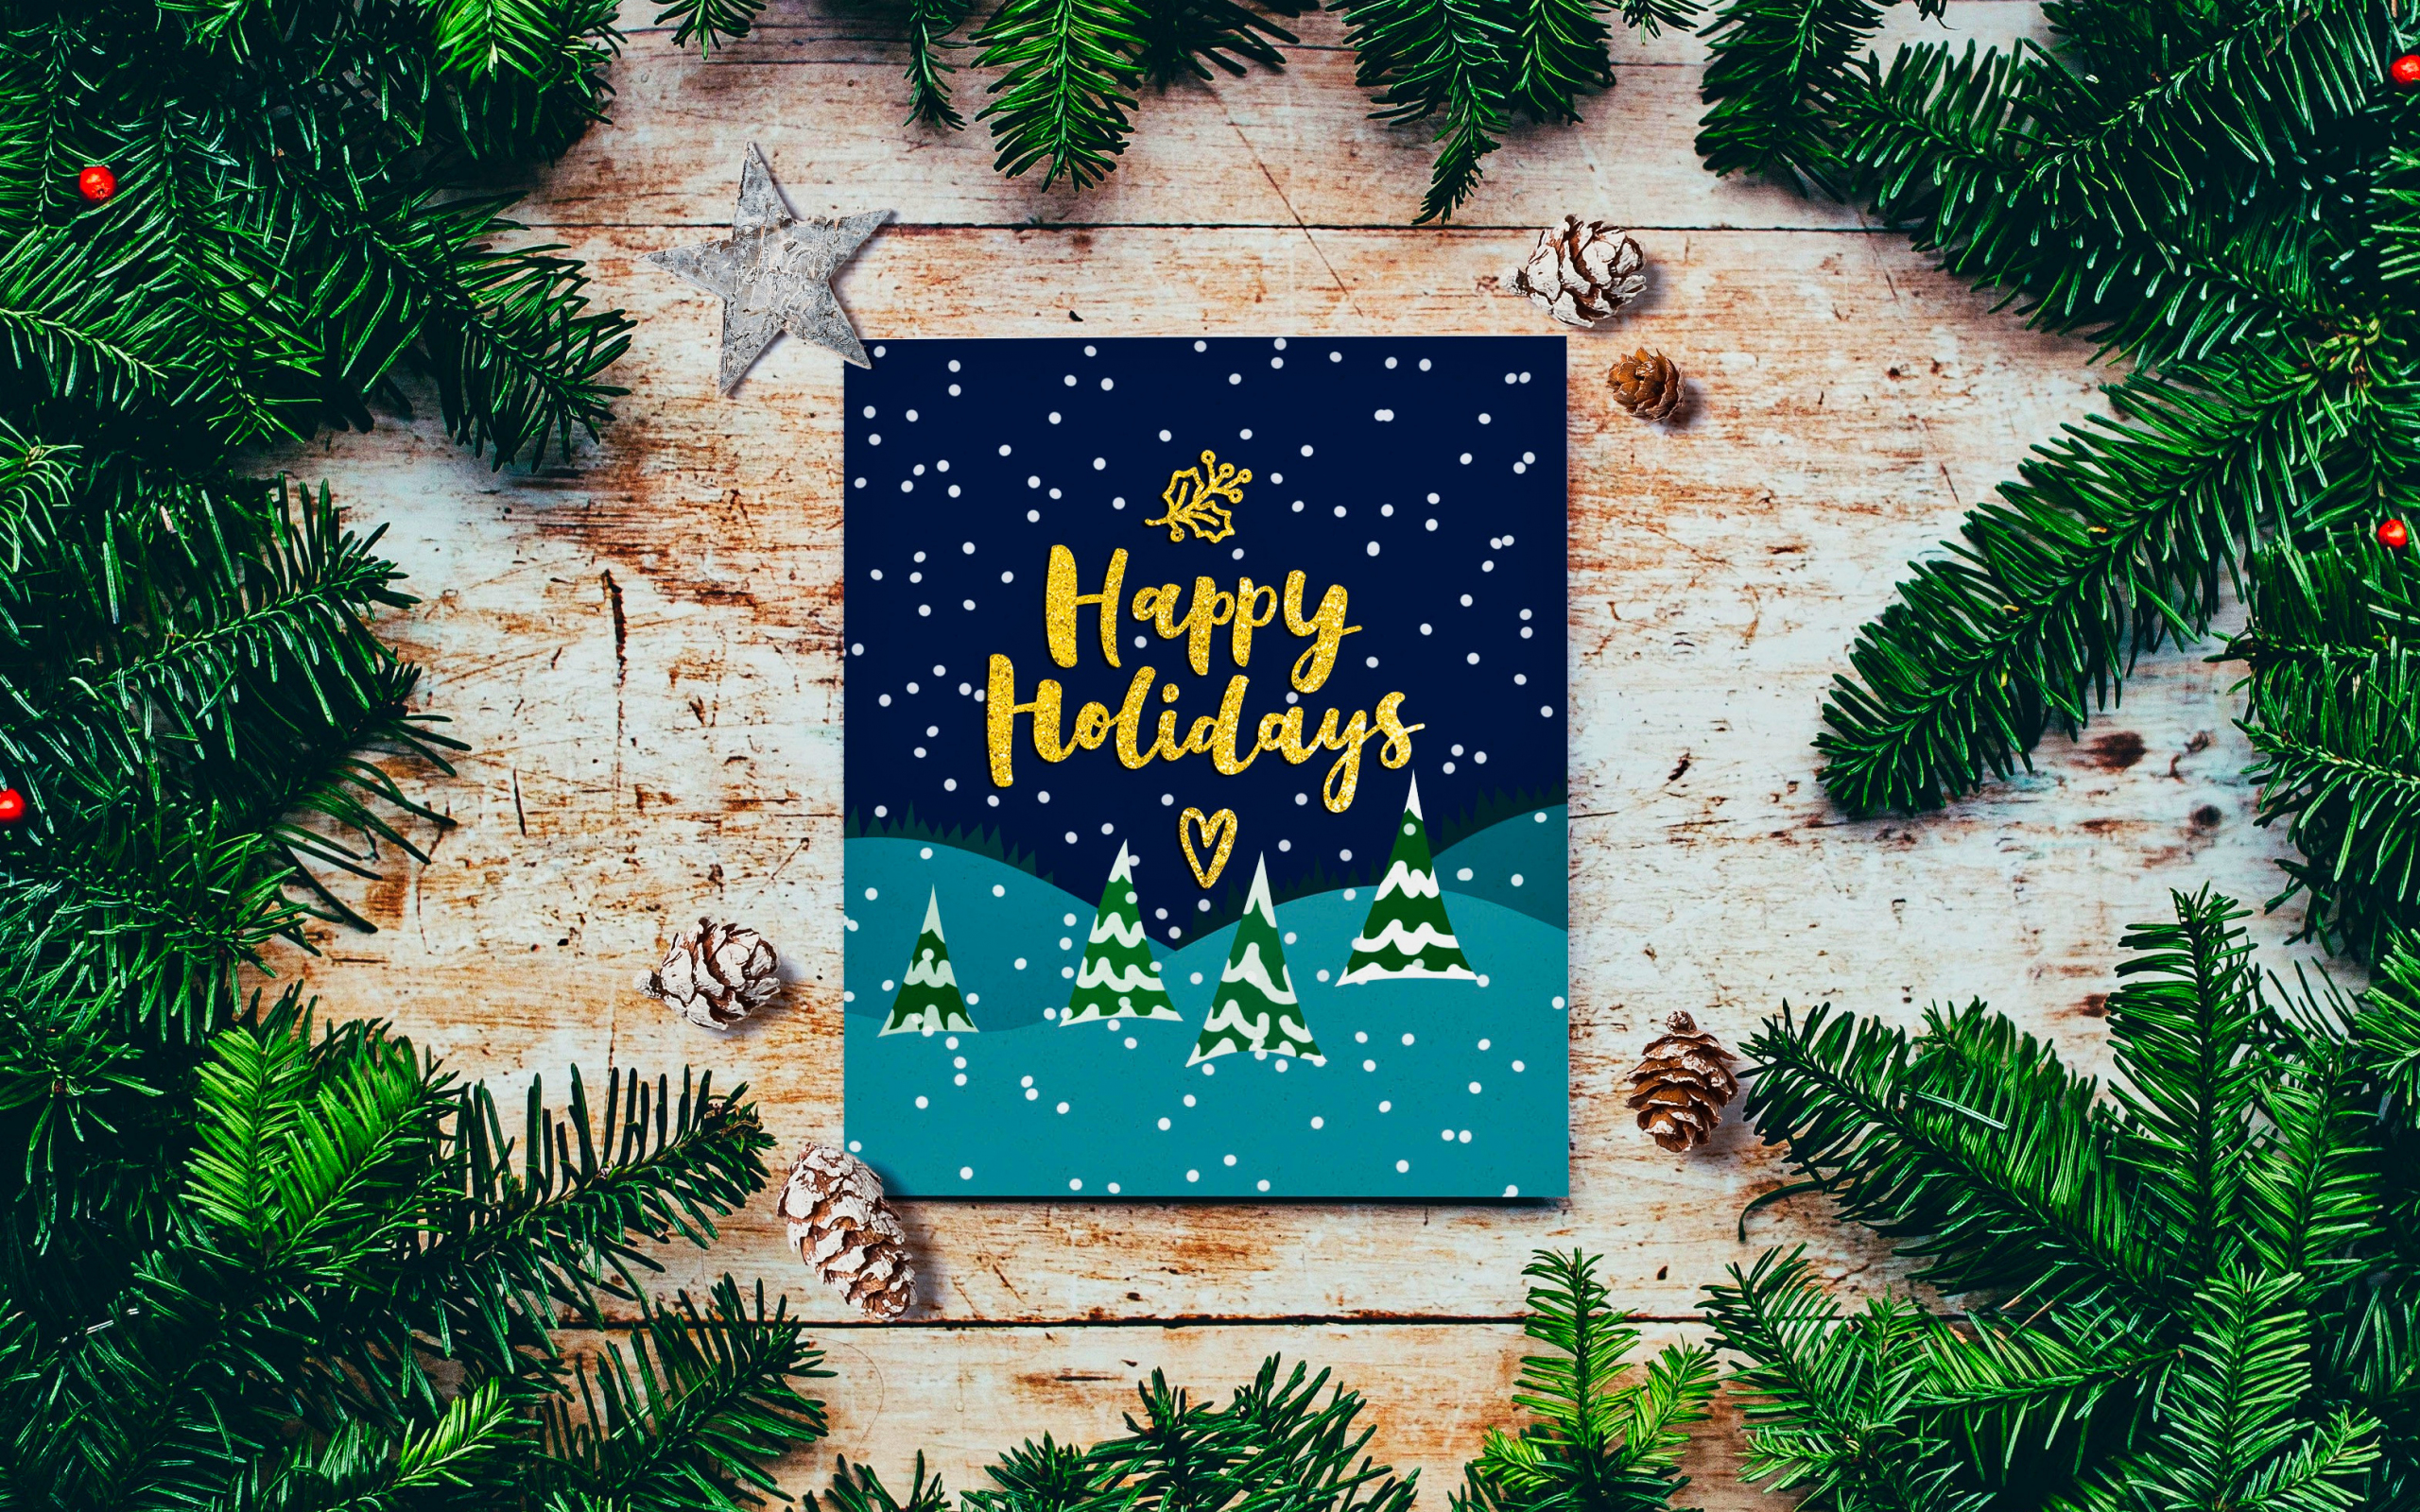 Download 2560x1600 wallpaper happy holidays, merry christmas, happy new year, greetings card, dual wide, widescreen 16: widescreen, 2560x1600 HD image, background, 23624